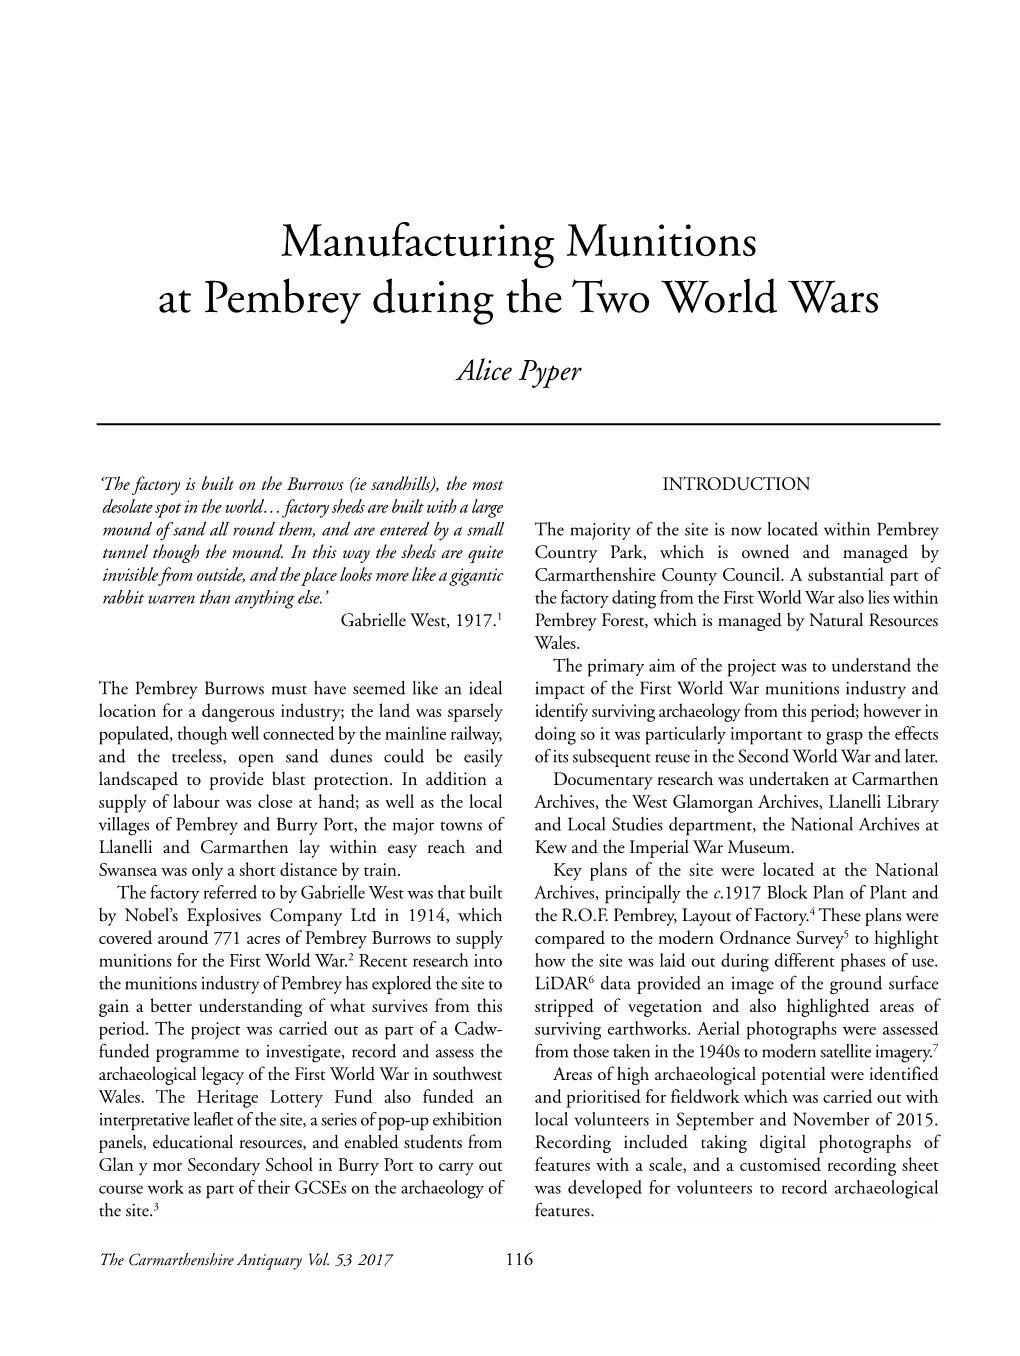 Manufacturing Munitions at Pembrey During the Two World Wars